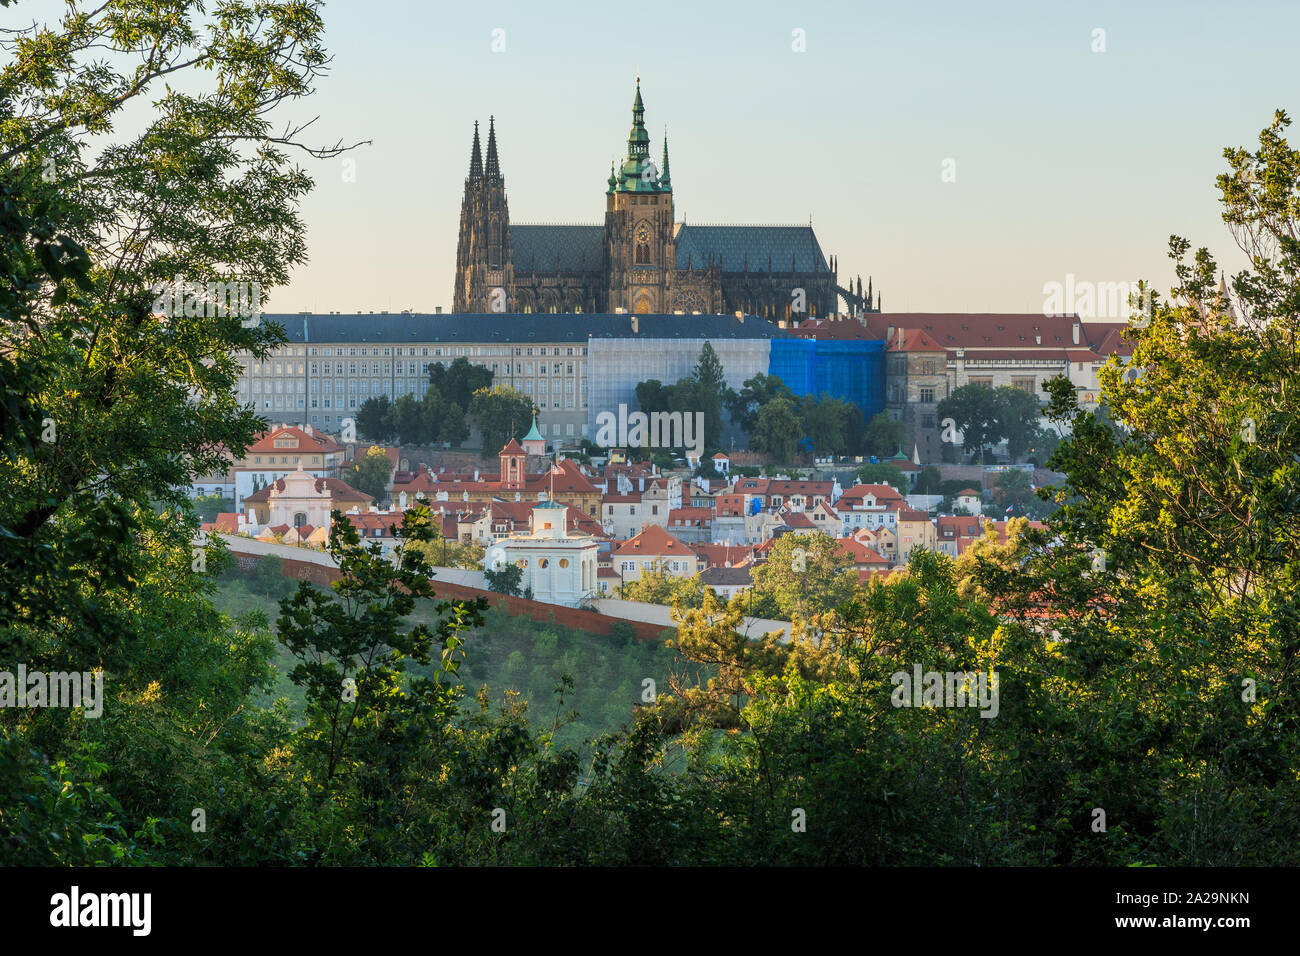 View of Prague Castle with the St. Vitus Cathedral from the viewpoint Petrin in the Mala Strana district on sunny day with blue sky trees and bushes i Stock Photo